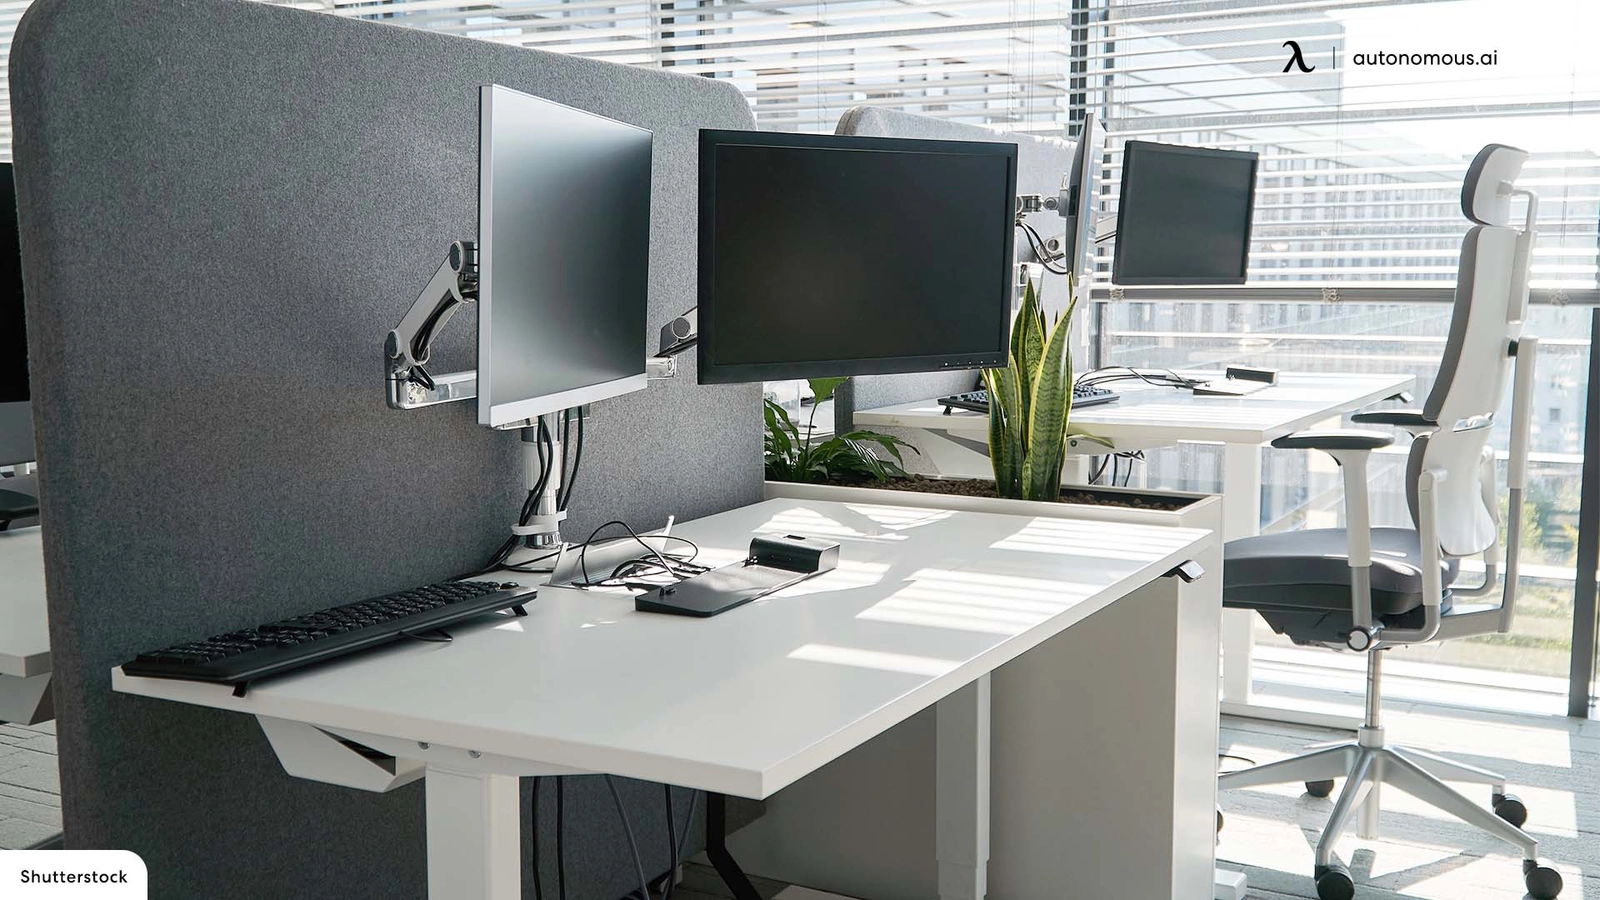 Where to Buy Tall Office Furniture with the Best Quality?